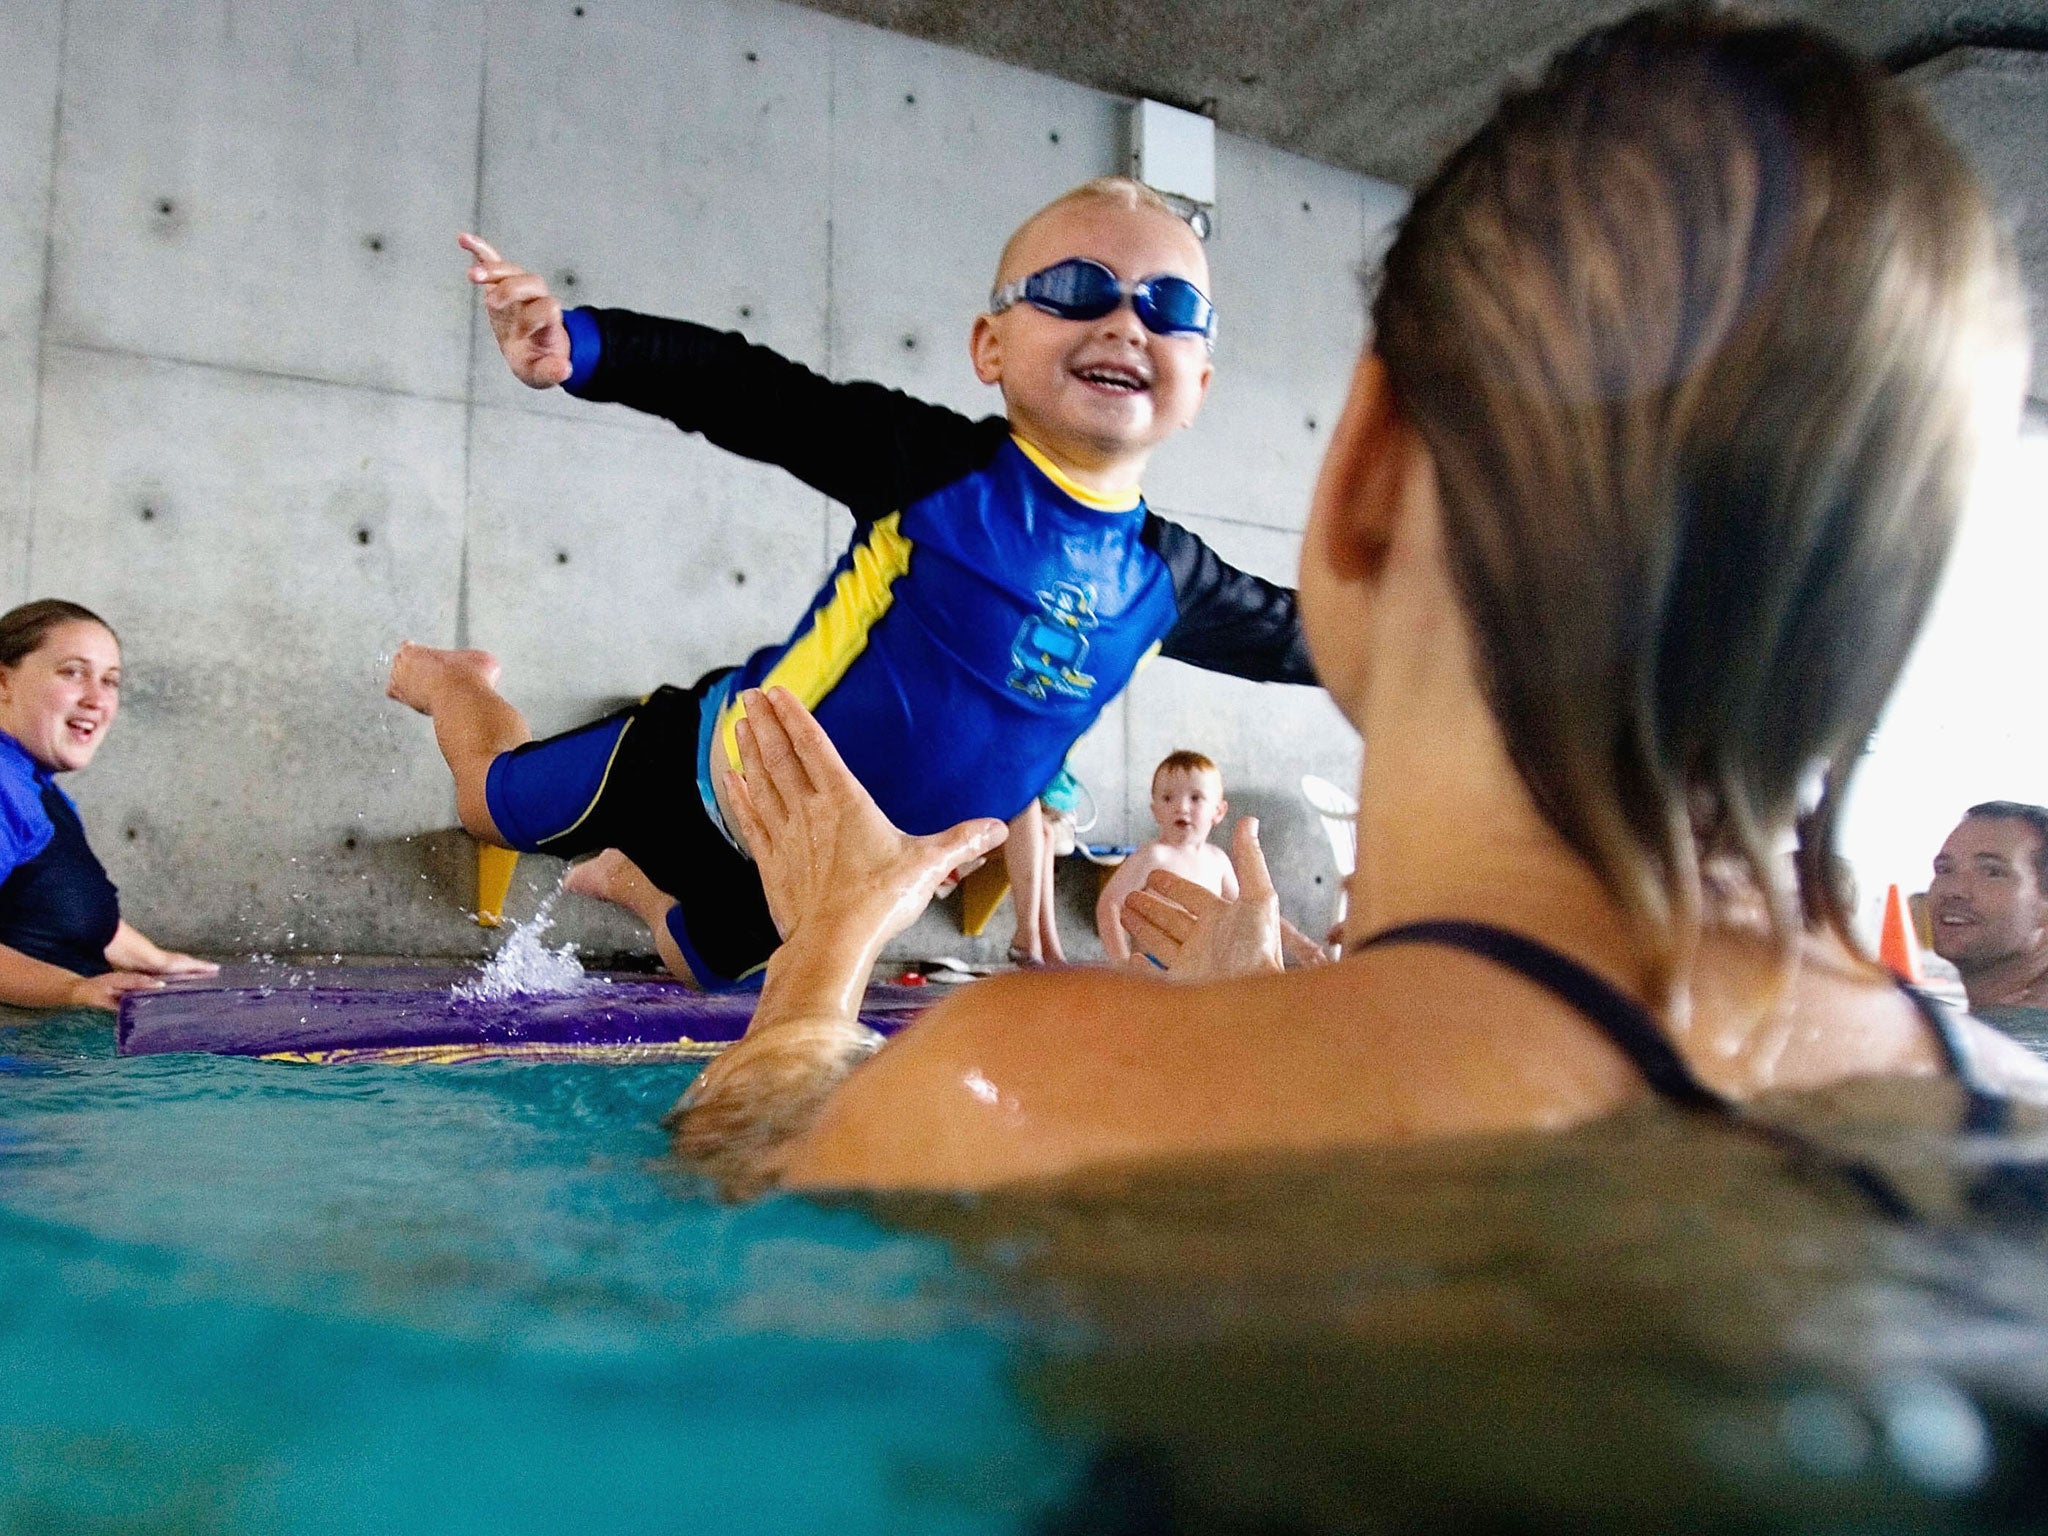 A toddler jumps onto his mother during a swimming class for babies at Lane Cove pool March 16, 2007 in Sydney, Australia. According to Andy West's Non-Parent's Guide to Parenting, only lazy parents have fat children.